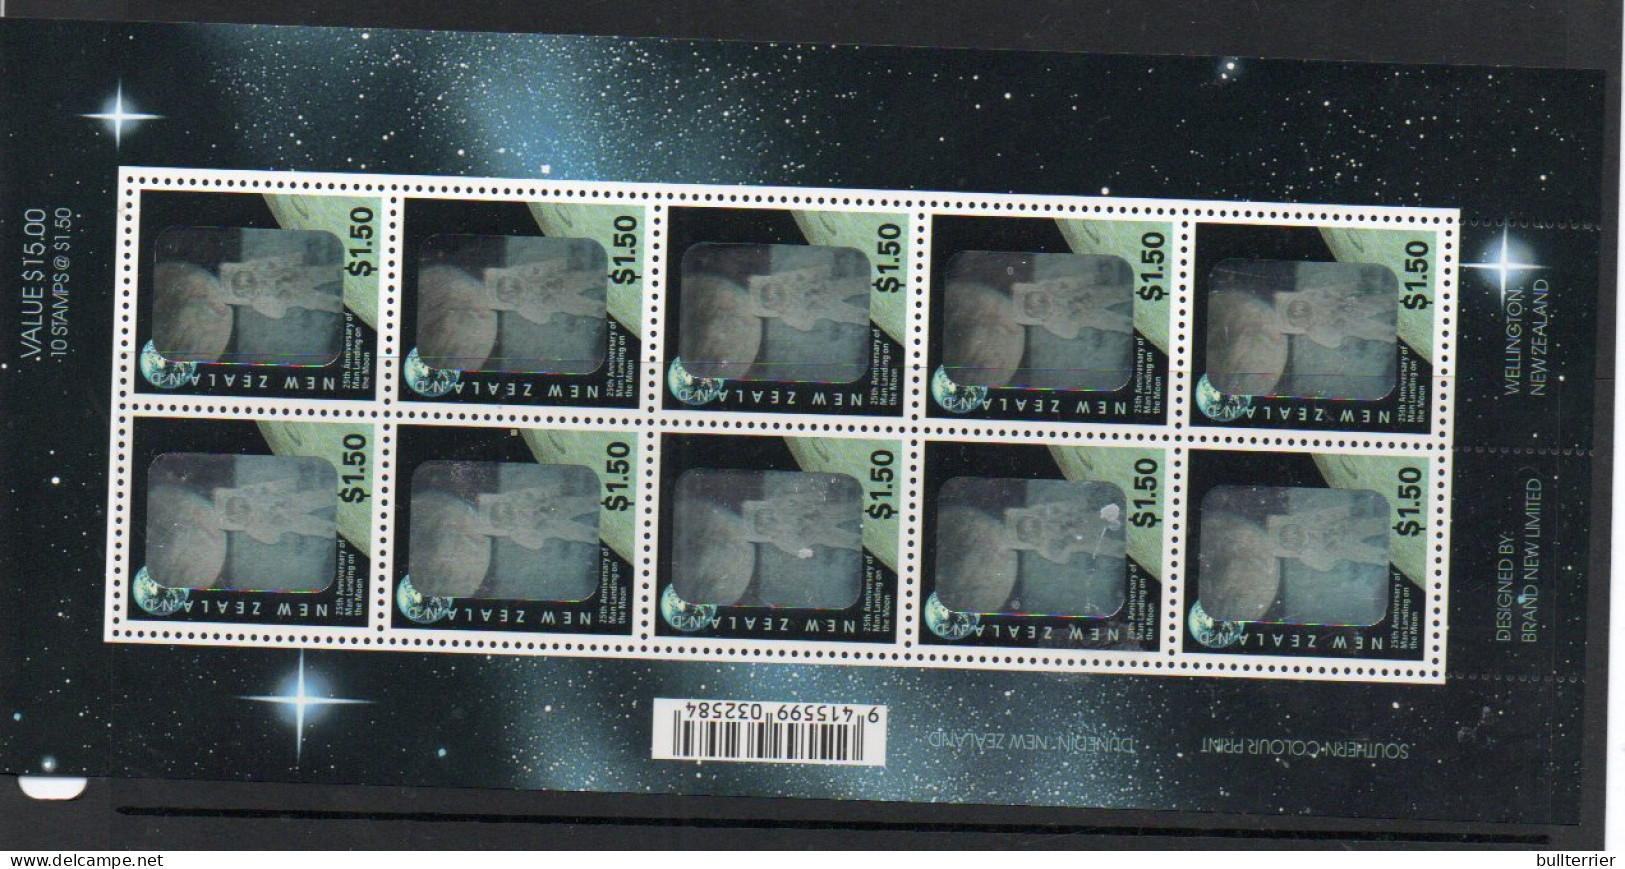 HOLOGRAMS - NEW ZEALAND - 1994- MAN ON MOON £1.50 SHEETLET OF 10  MINT NEVER HINGED, SG CAT £22.50 - Hologrammes